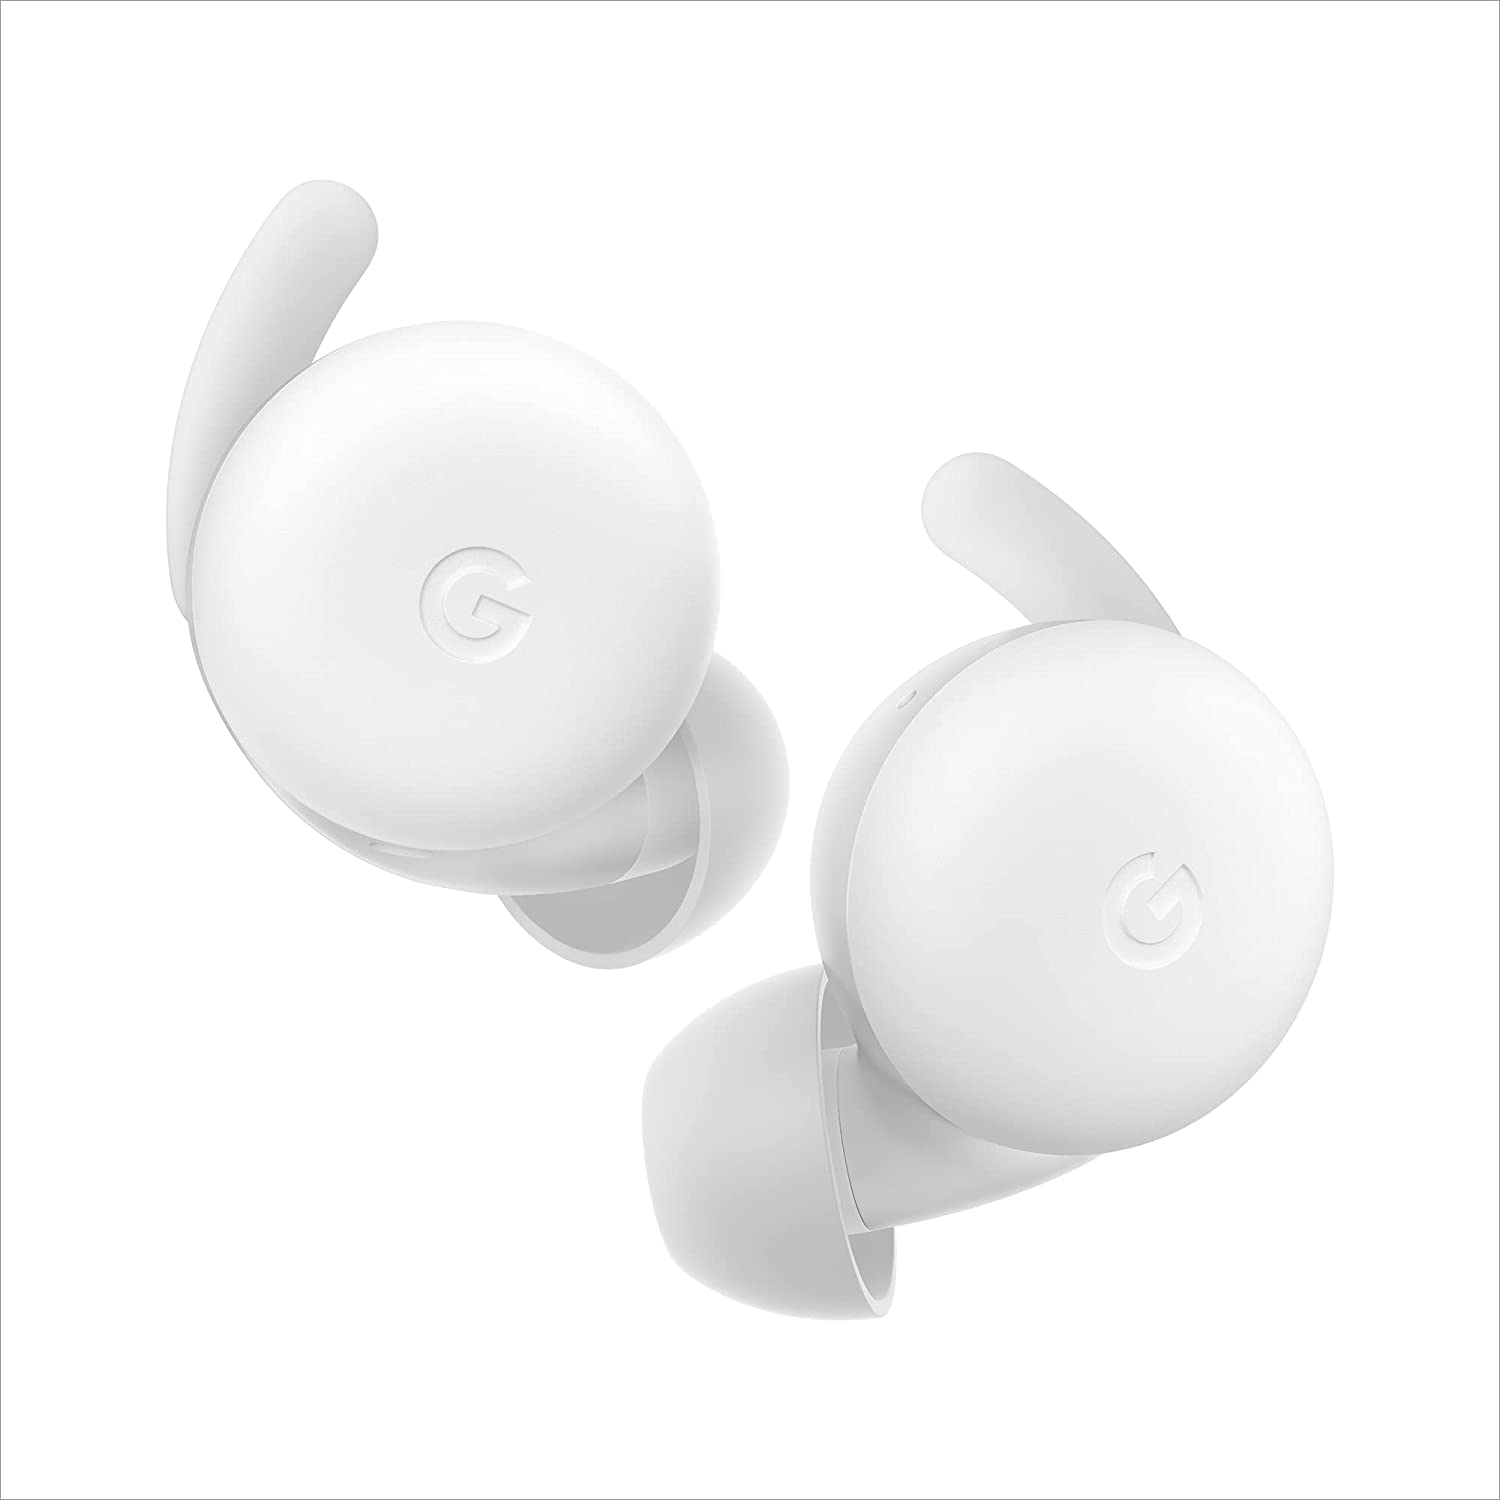 Google Pixel Buds A-Series In-Ear Wireless Earbuds - White - Refurbished Pristine